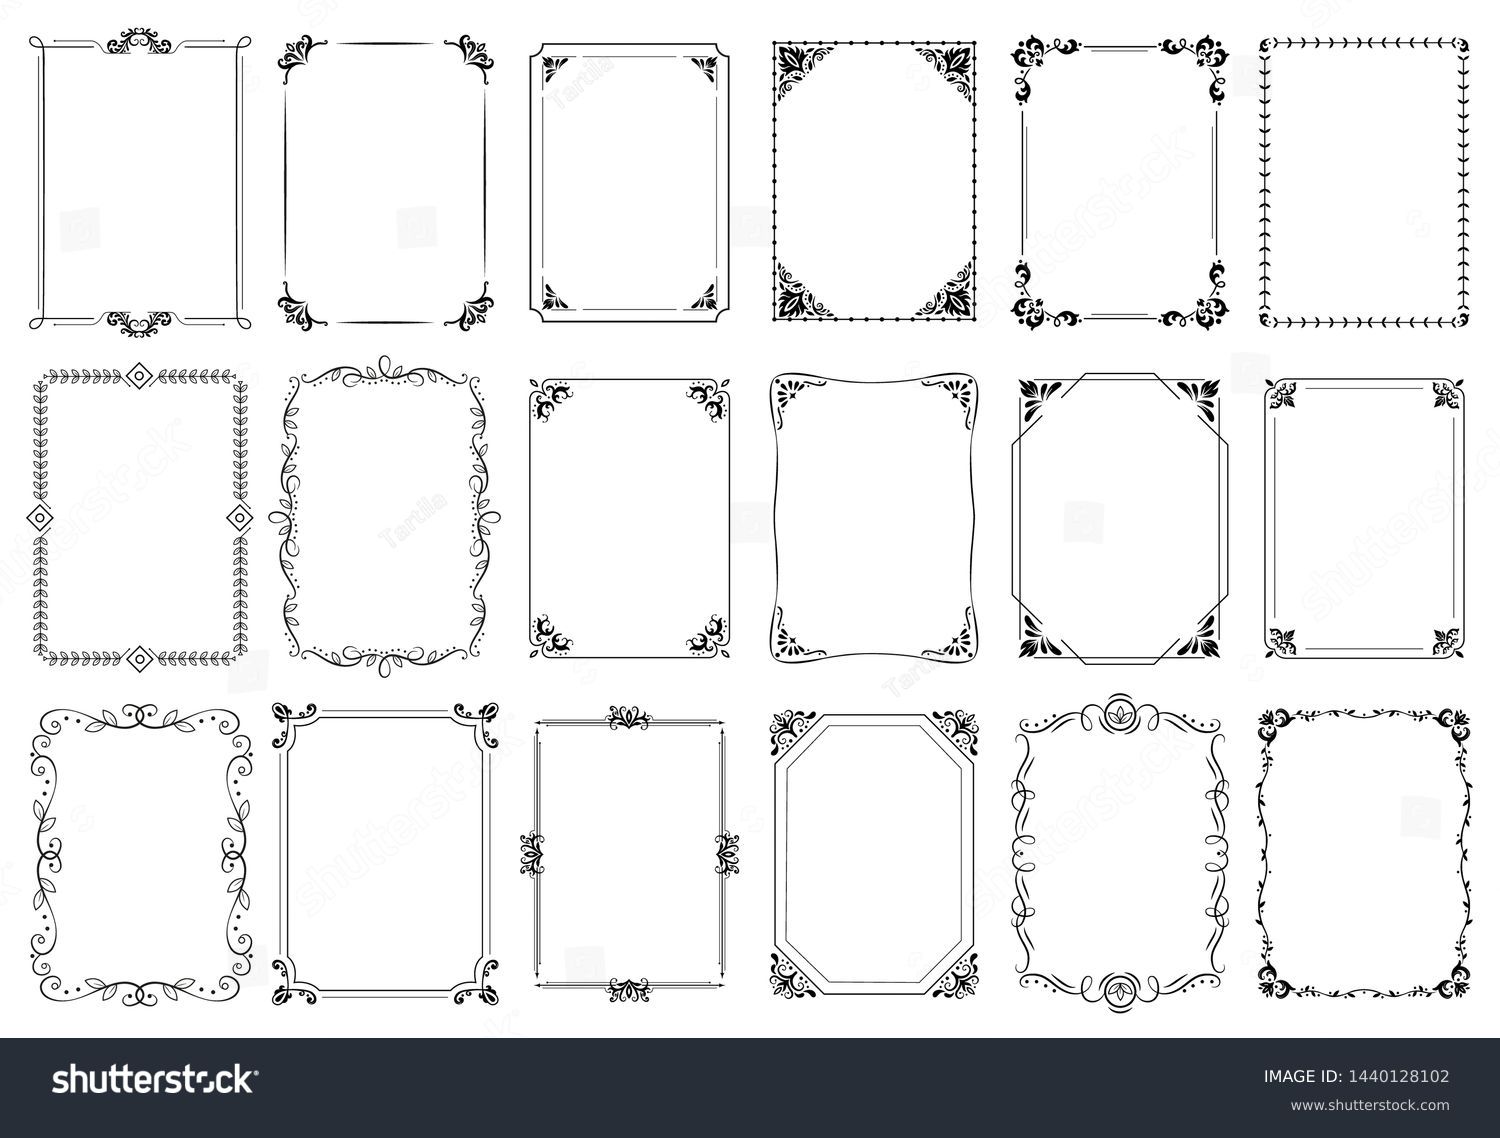 Decorative frames. Retro ornamental frame, vintage rectangle ornaments and ornate border. Decorative wedding frames, antique museum picture borders or deco devider. Isolated icons vector set #1440128102